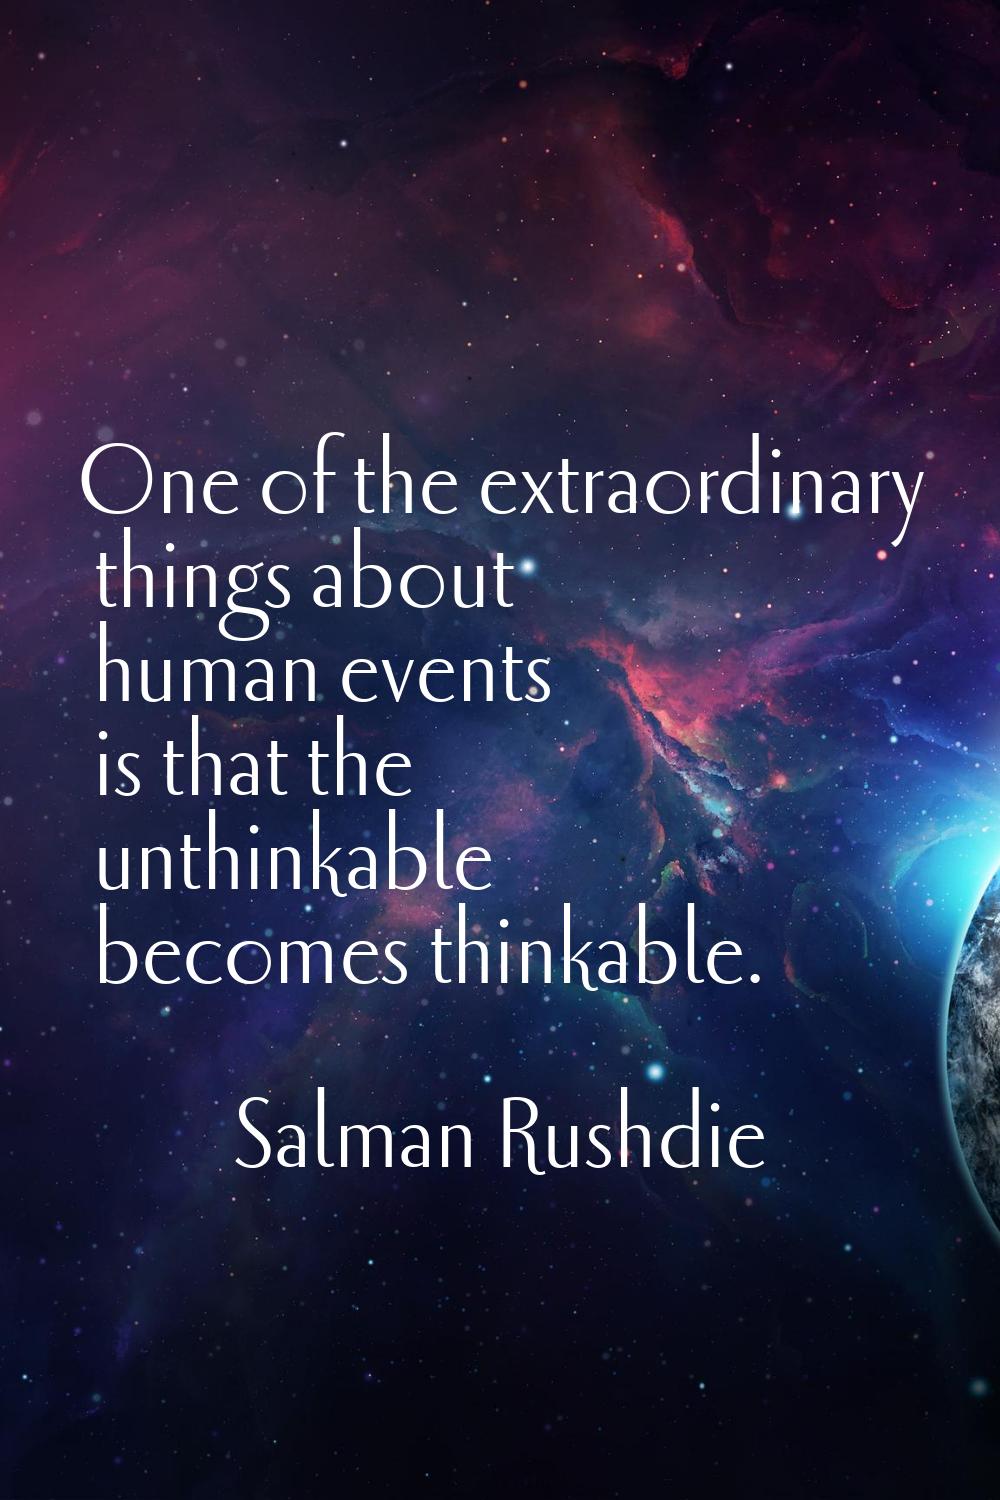 One of the extraordinary things about human events is that the unthinkable becomes thinkable.